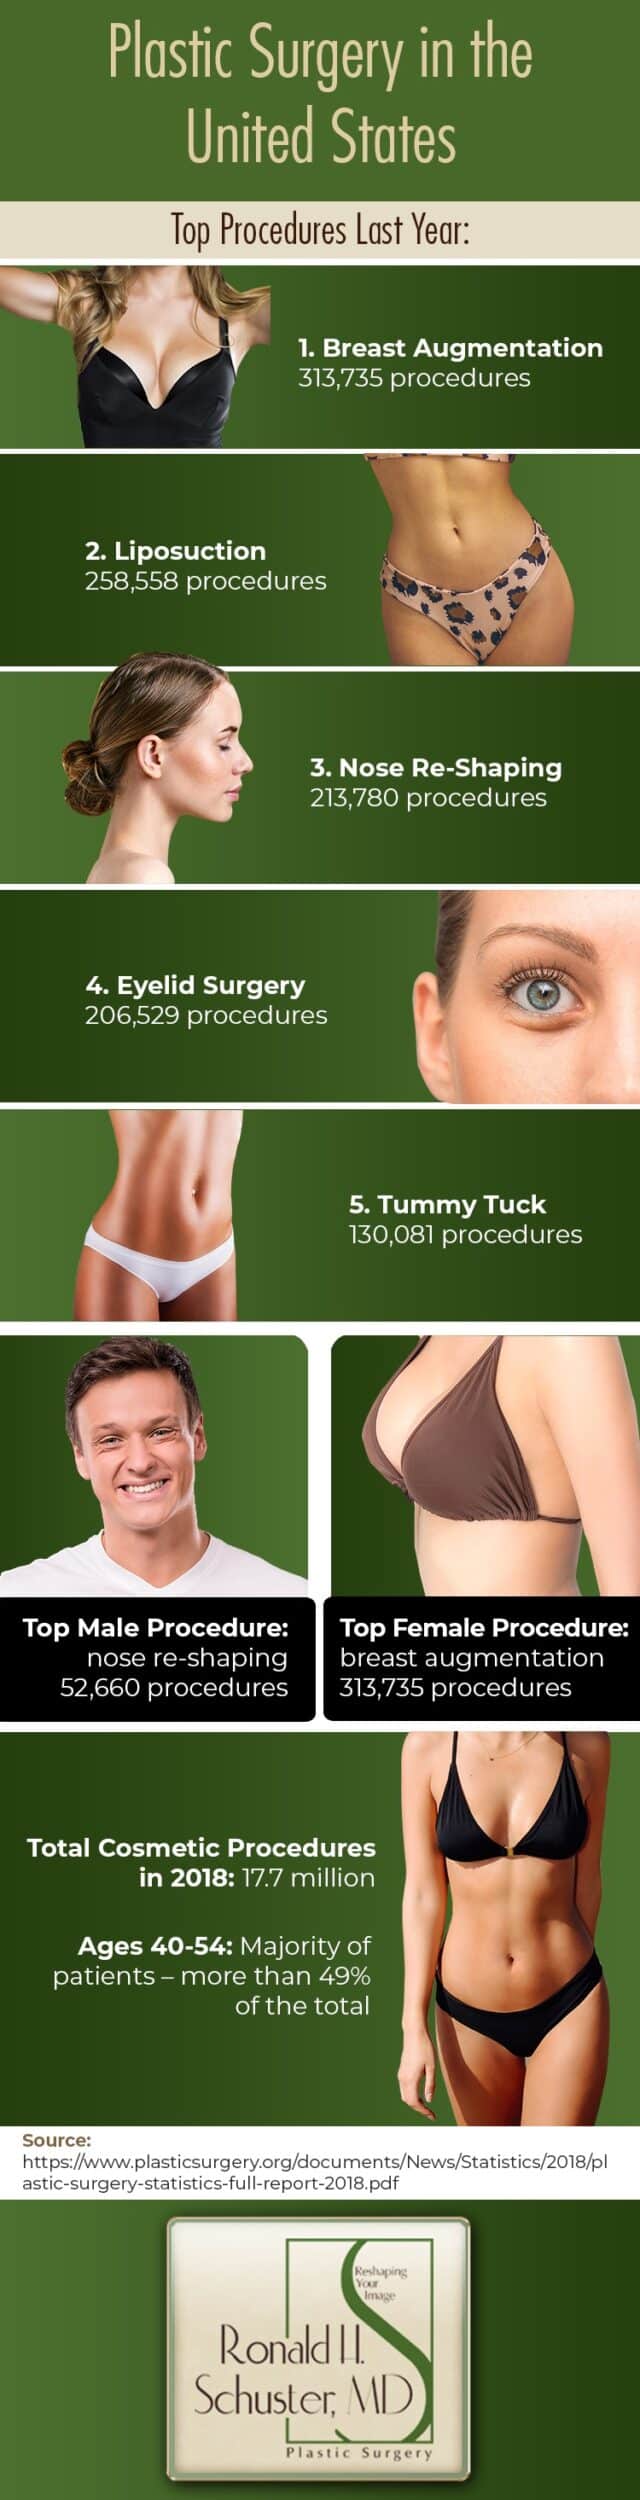 Infographic showing plastic surgery statistics for 2018